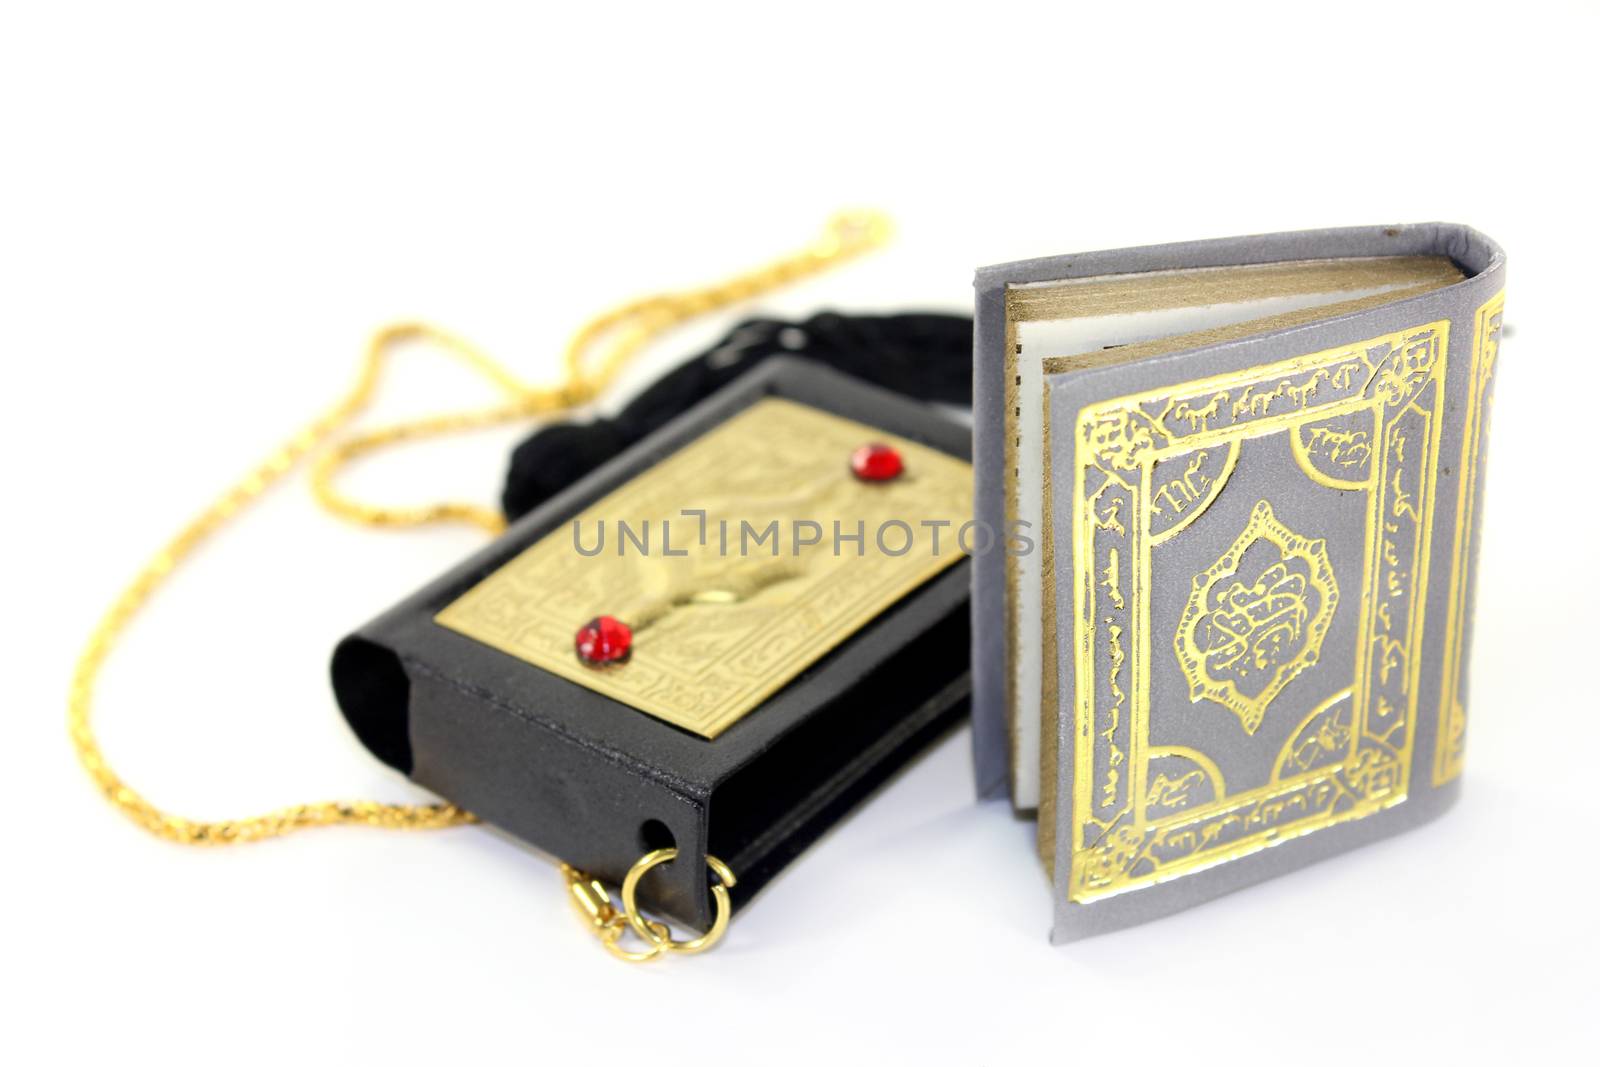 Quran with a cover and chain in front of white background